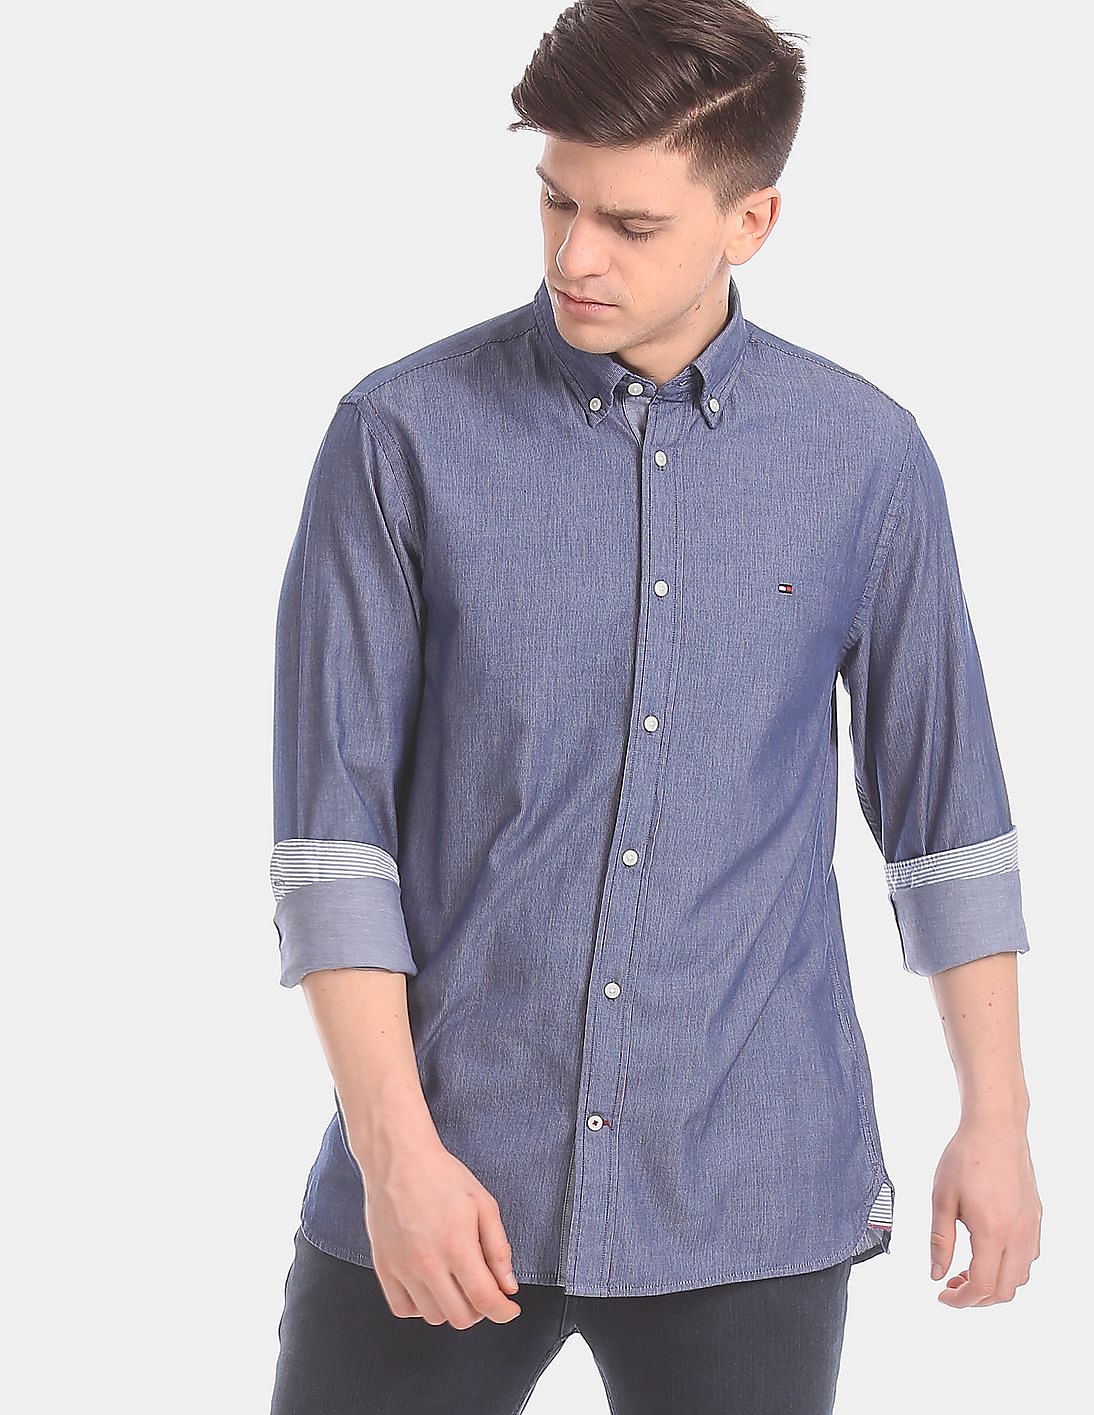 tommy hilfiger men's casual shirts